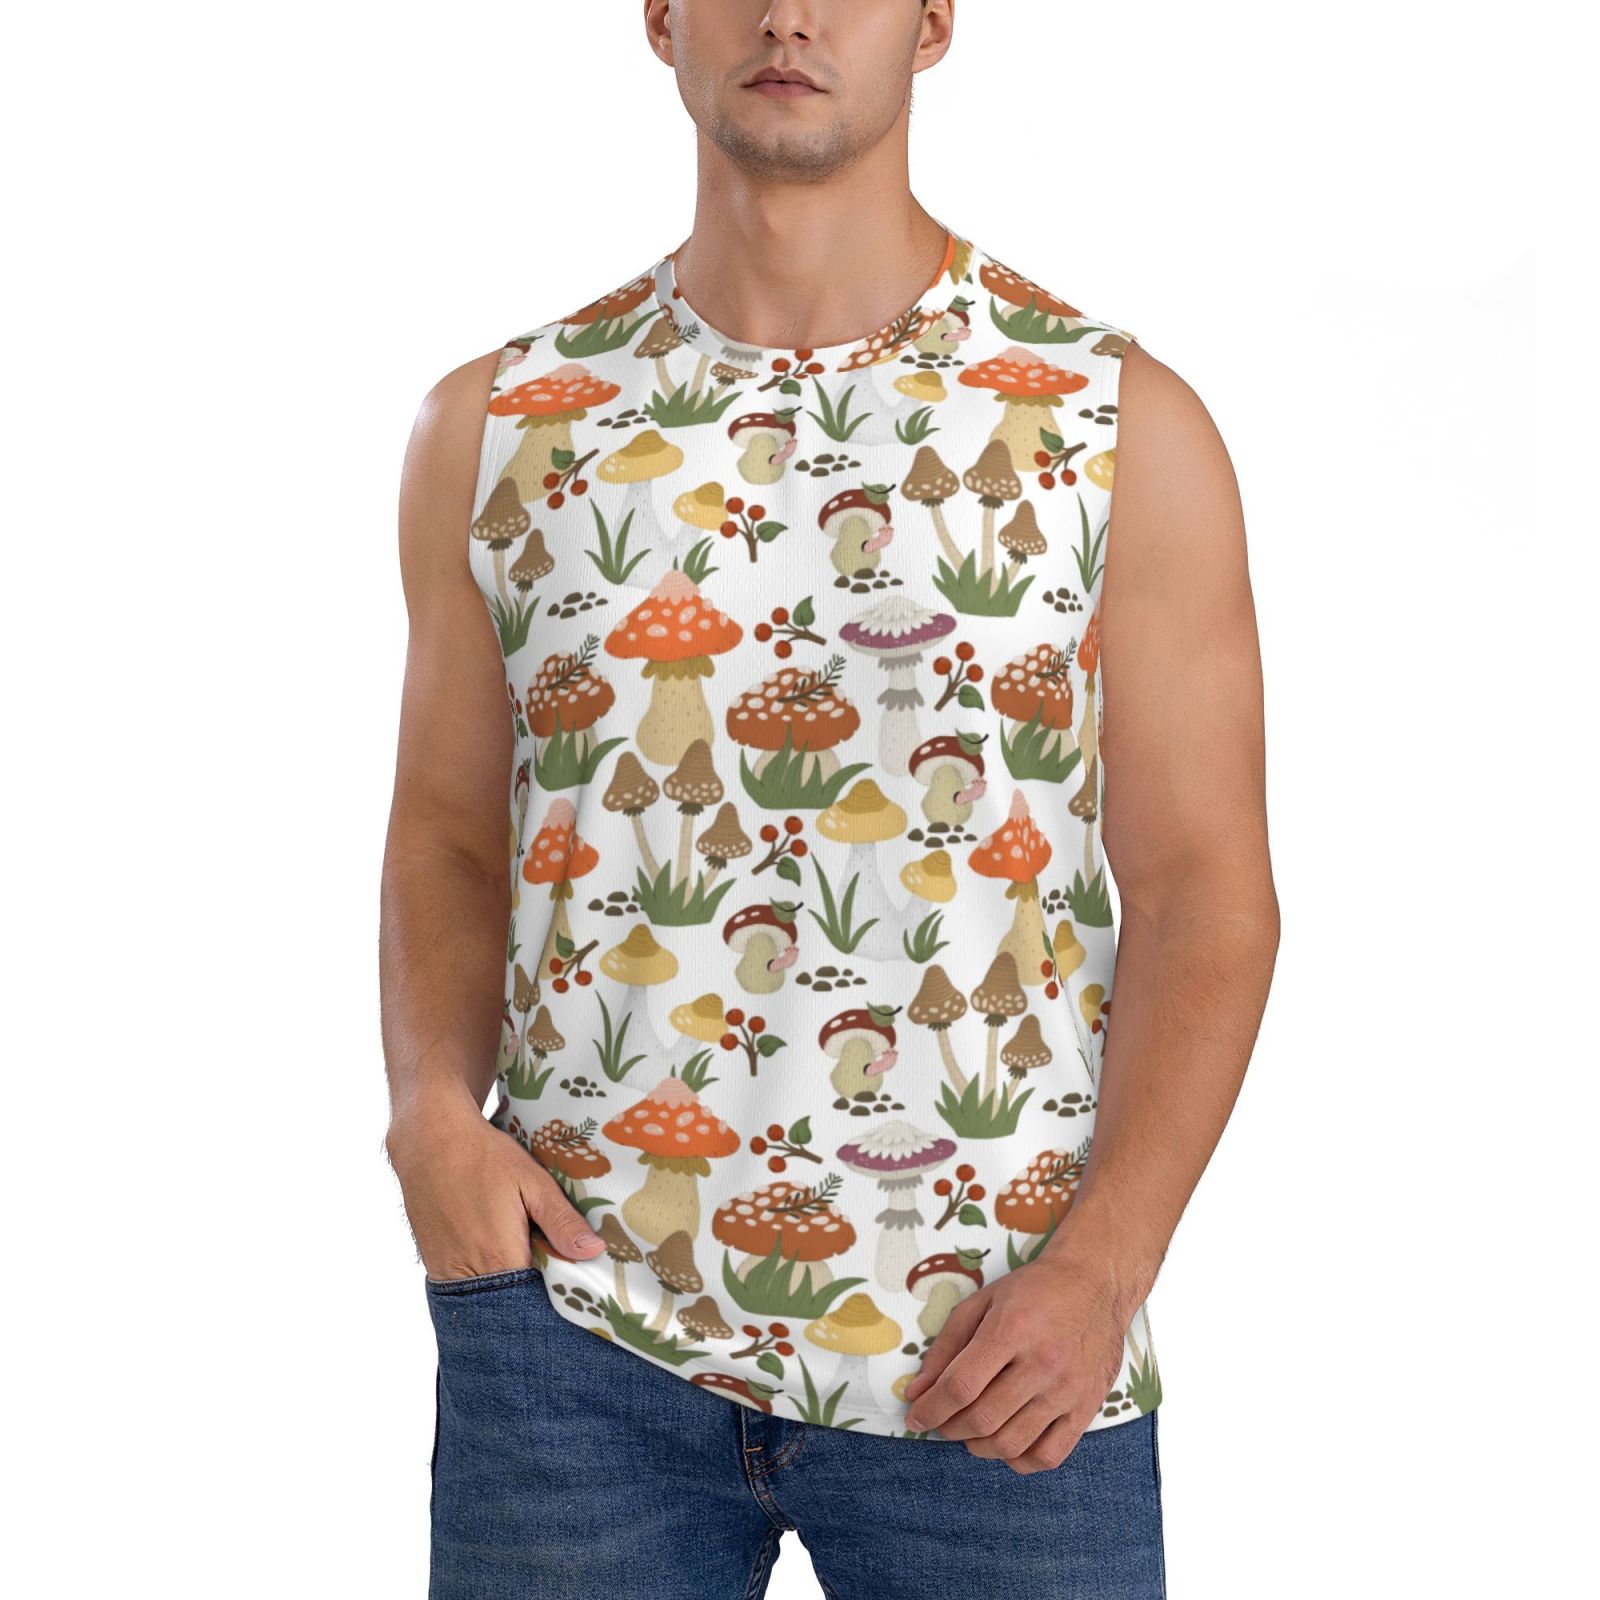 Coaee Mushrooms Men's Sleeveless T-Shirt with Quick Dry for Fitness ...